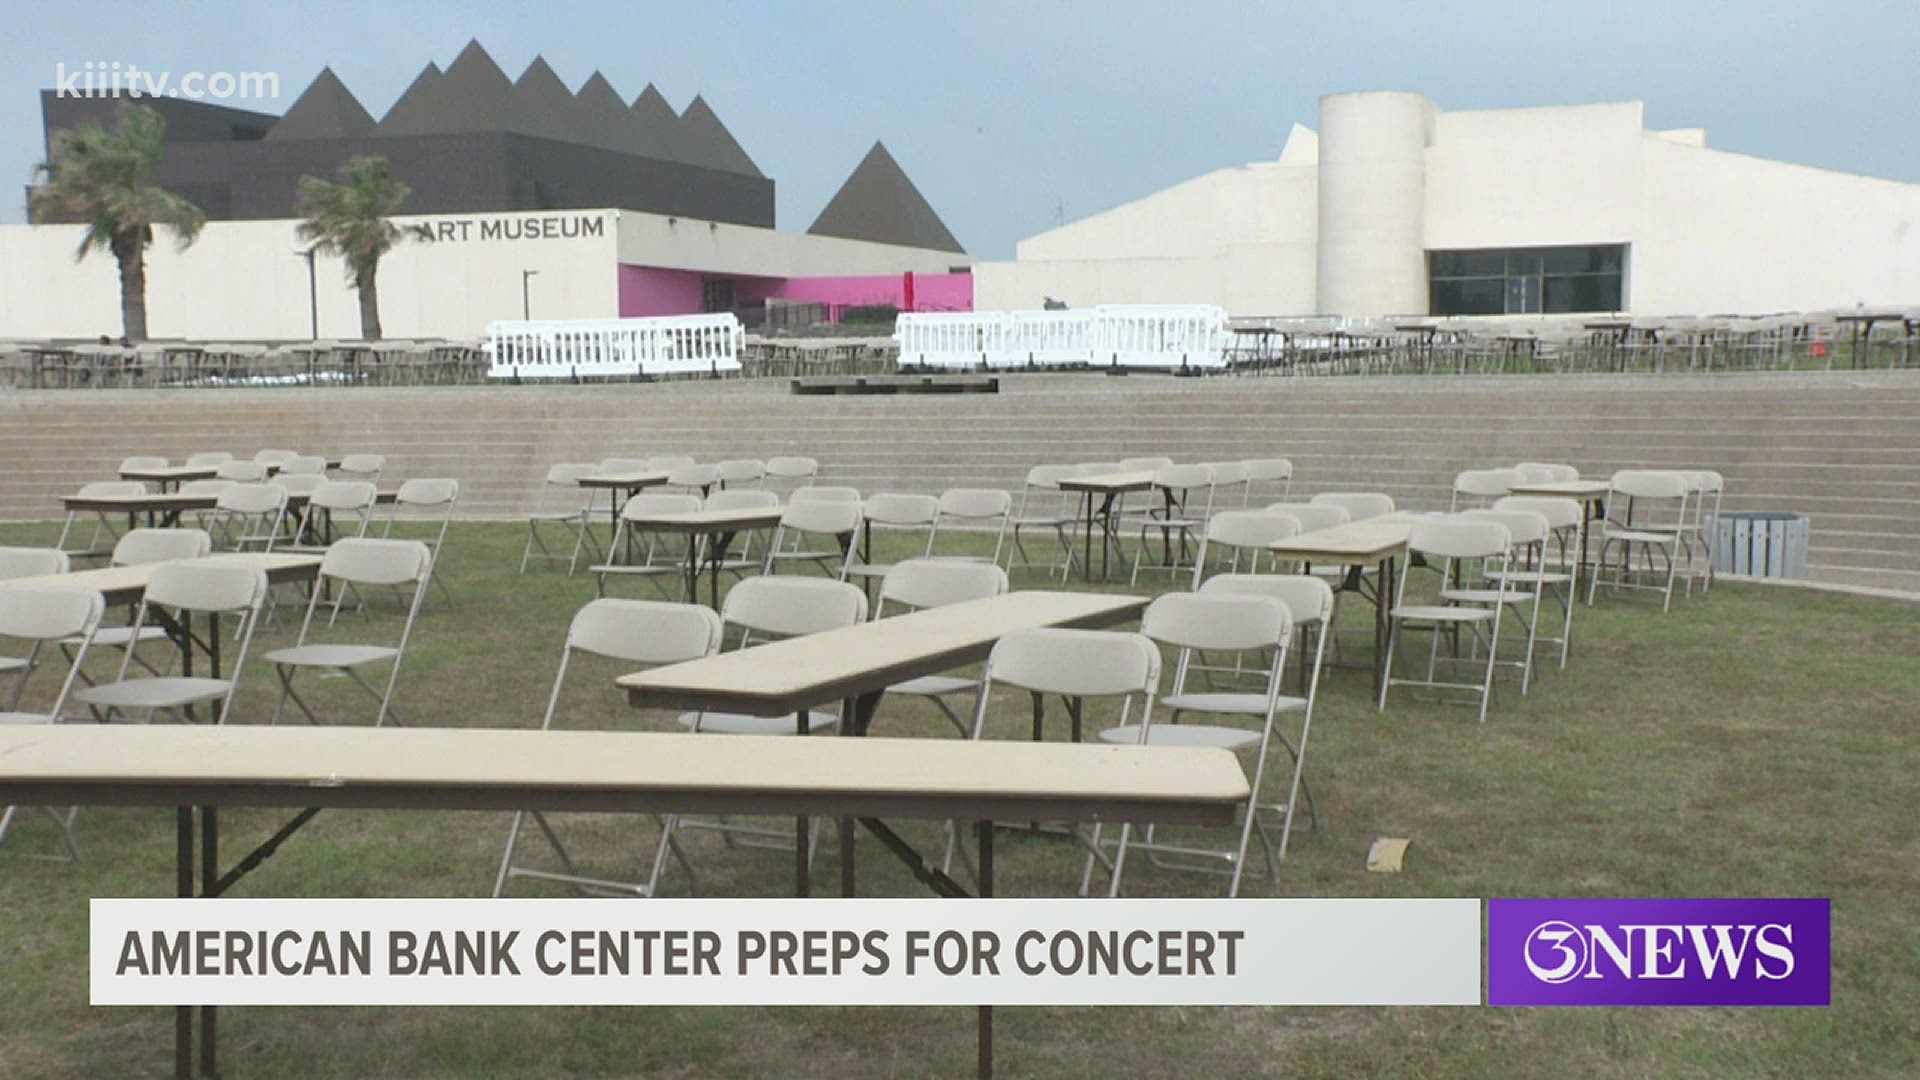 Friday the American Bank Center hosted their first concert of the year.